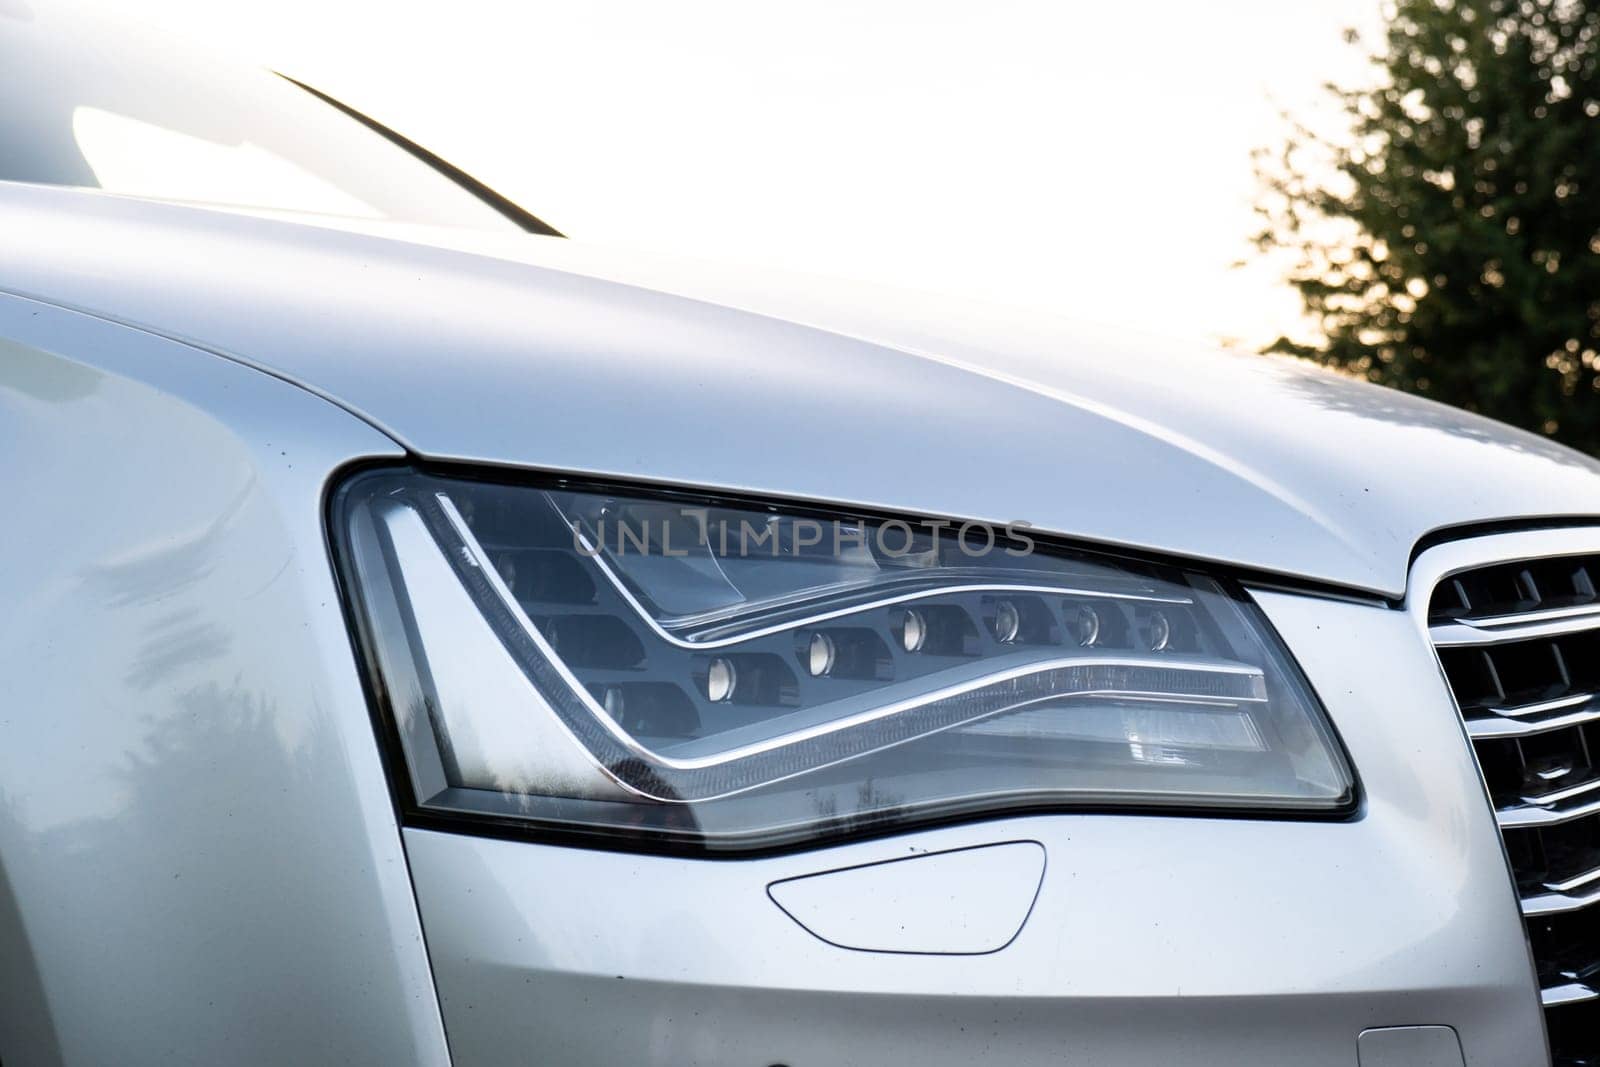 Clean car after Washing luxury silver car. Sedan car exterior of modern luxury car during sunset on highway road. Details of front headlamp. Prestige sport by anna_stasiia